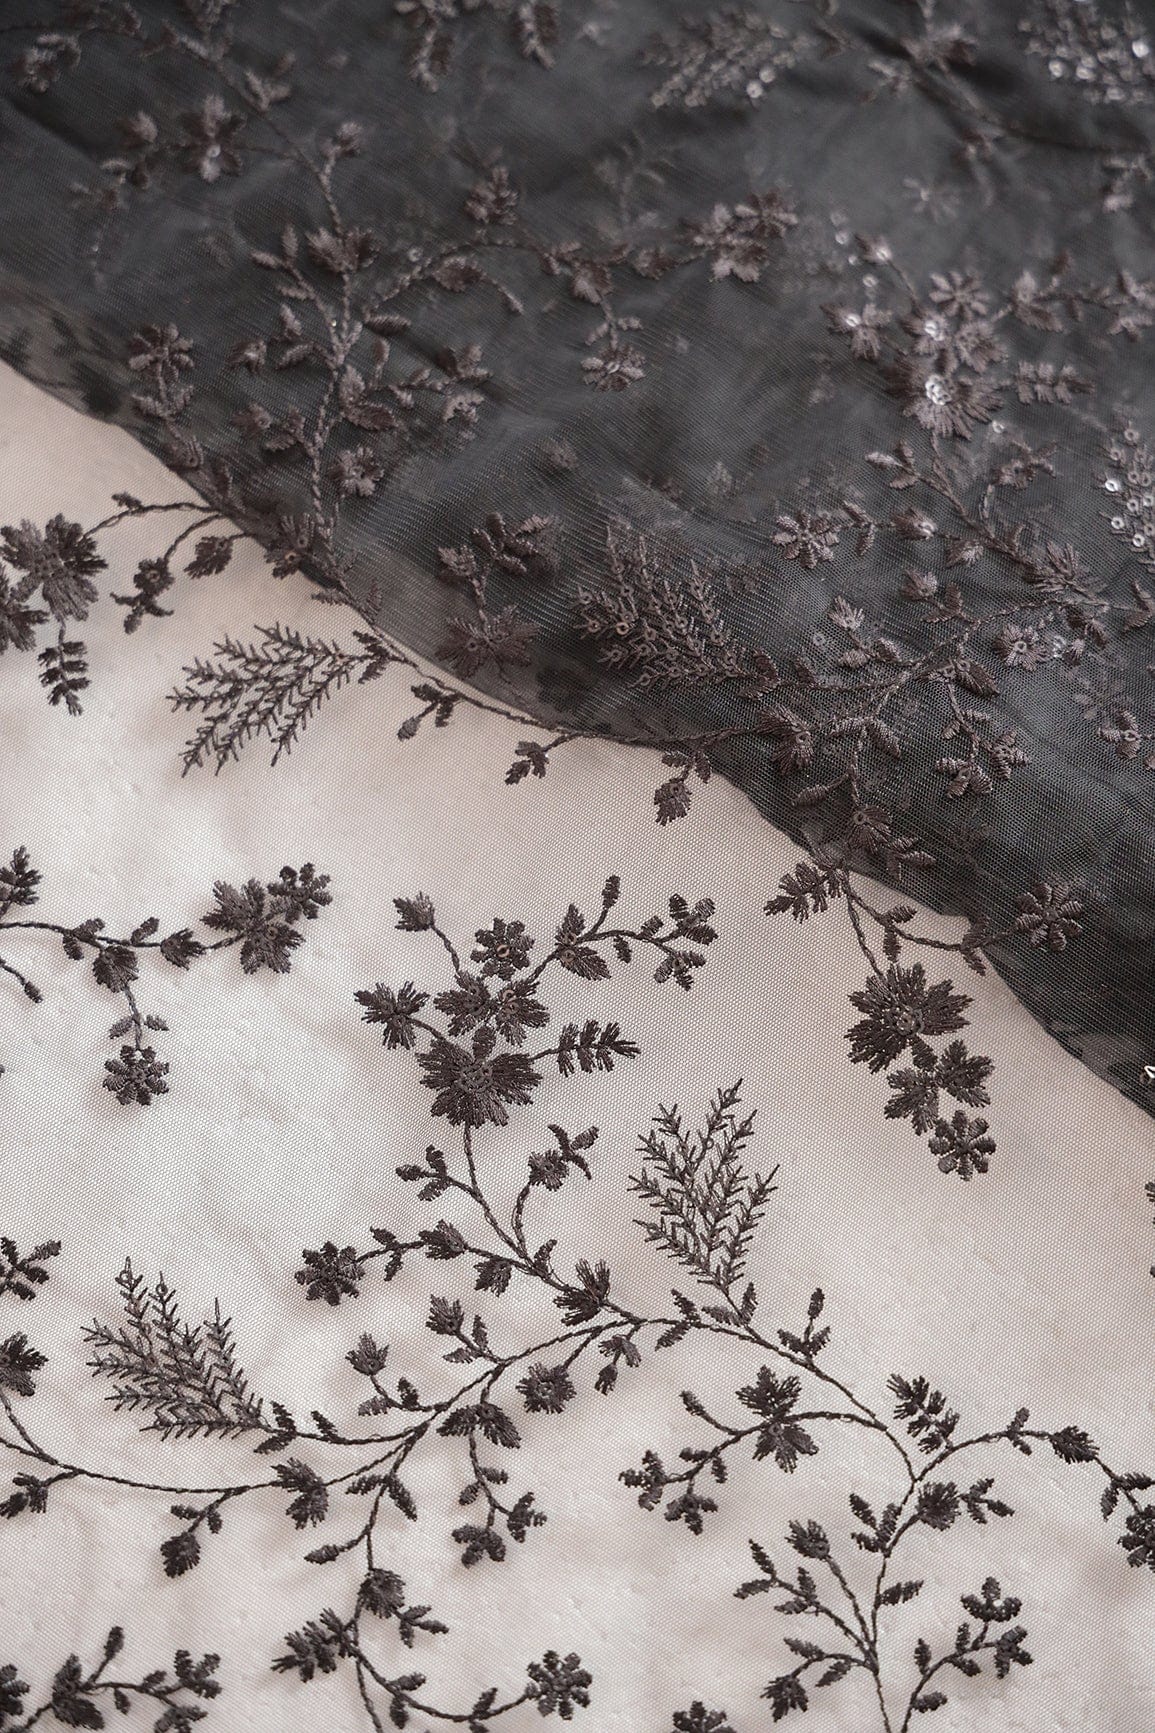 doeraa Embroidery Fabrics Black Thread With Sequins Beautiful Floral Embroidery Work On Black Soft Net Fabric